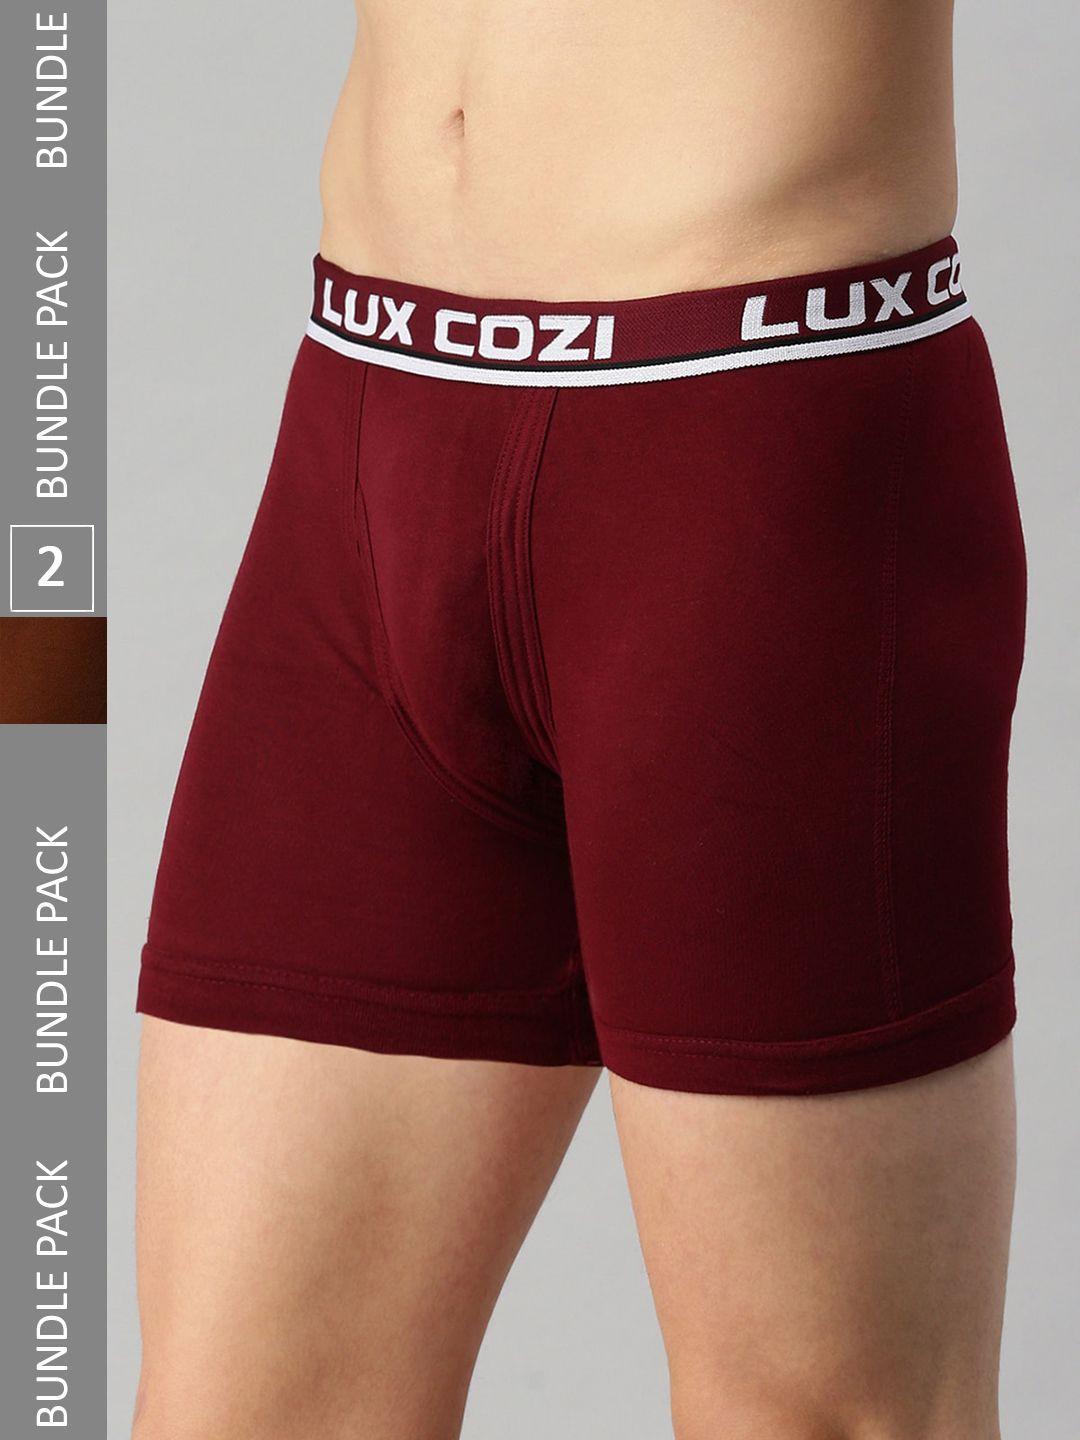 lux cozi men pack of 2 pure cotton trunks